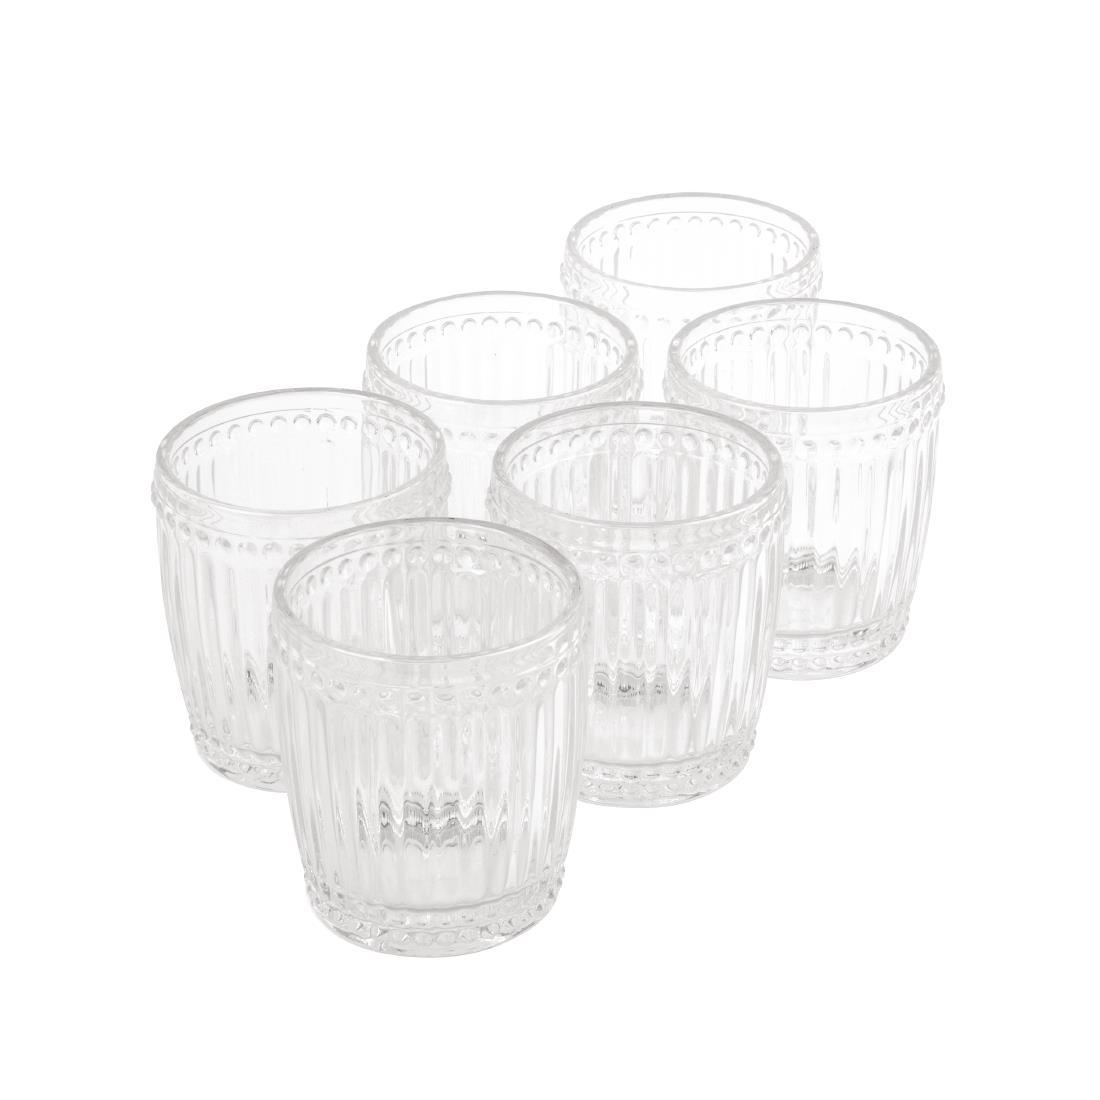 Olympia Baroque Whiskey Glasses Clear 325ml (Pack of 6) - CW397  - 4